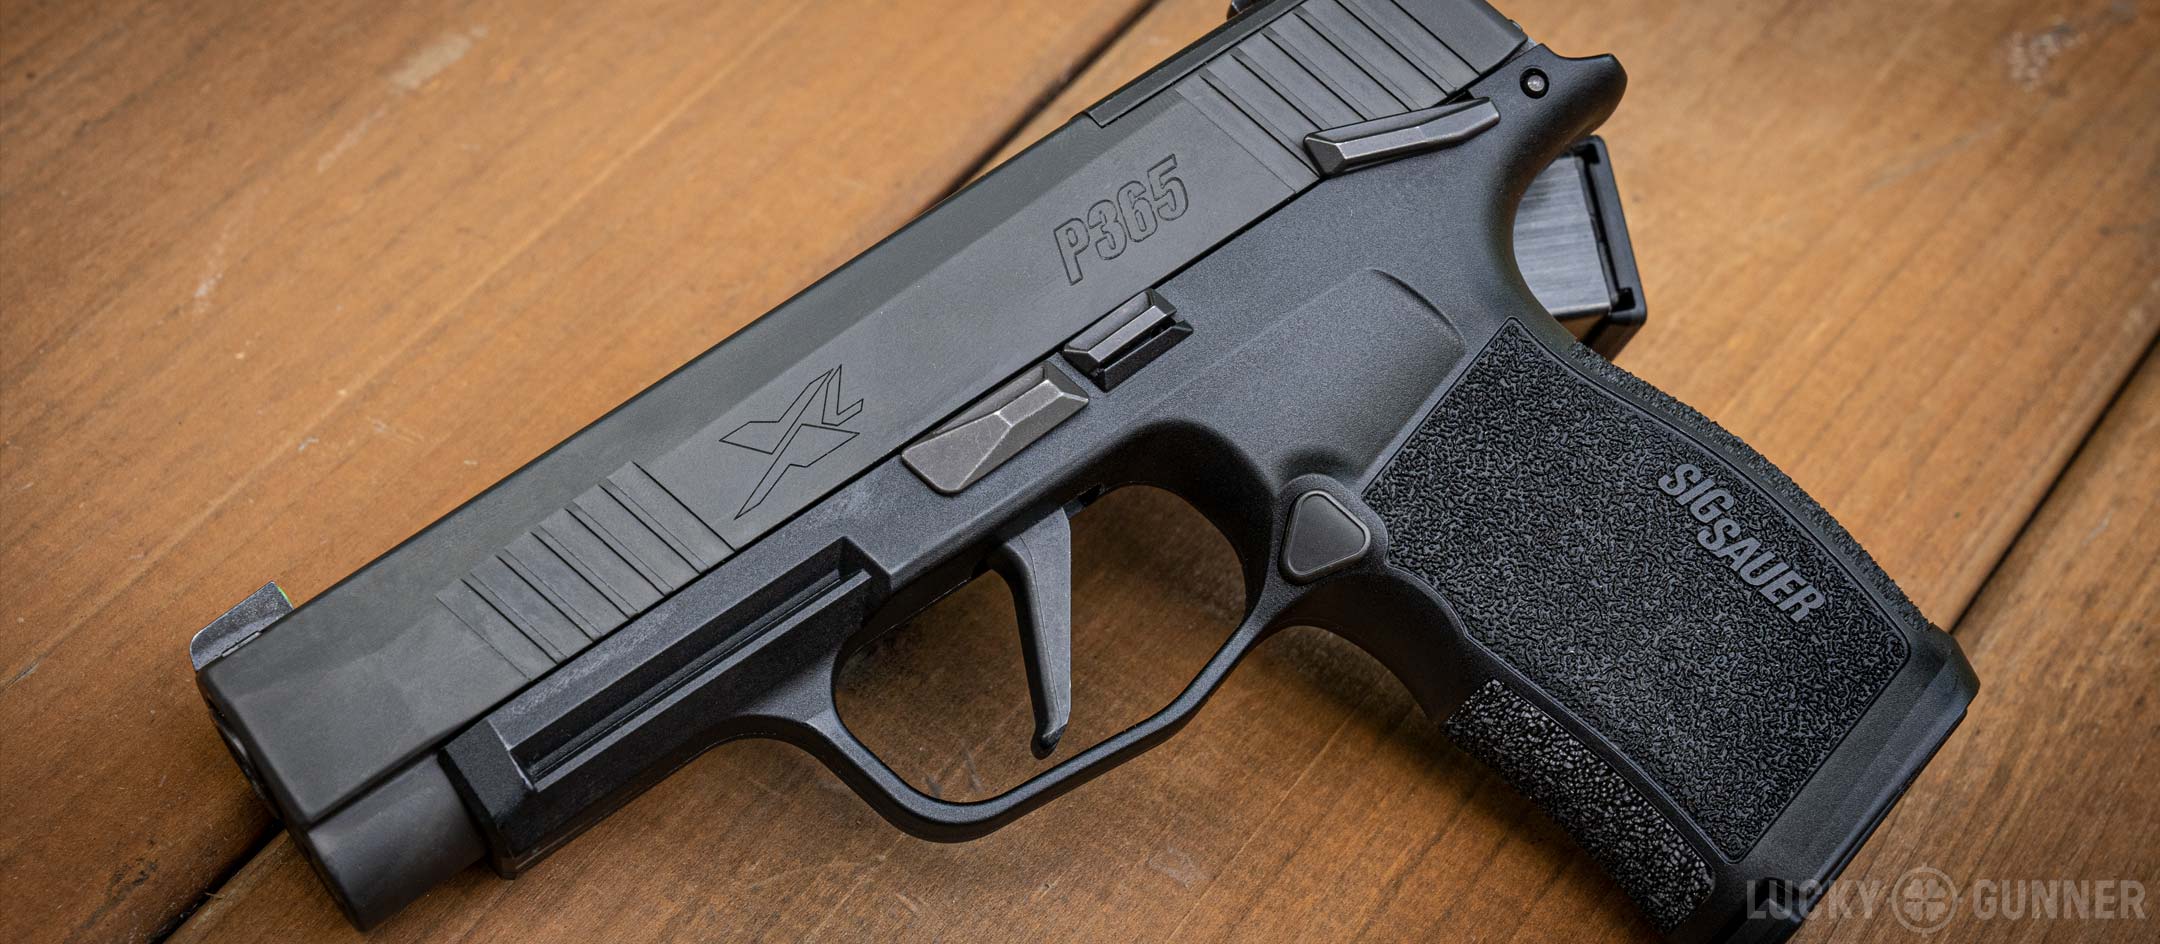 SIG P365 XL Review [Good Concealed Carry Handgun?]